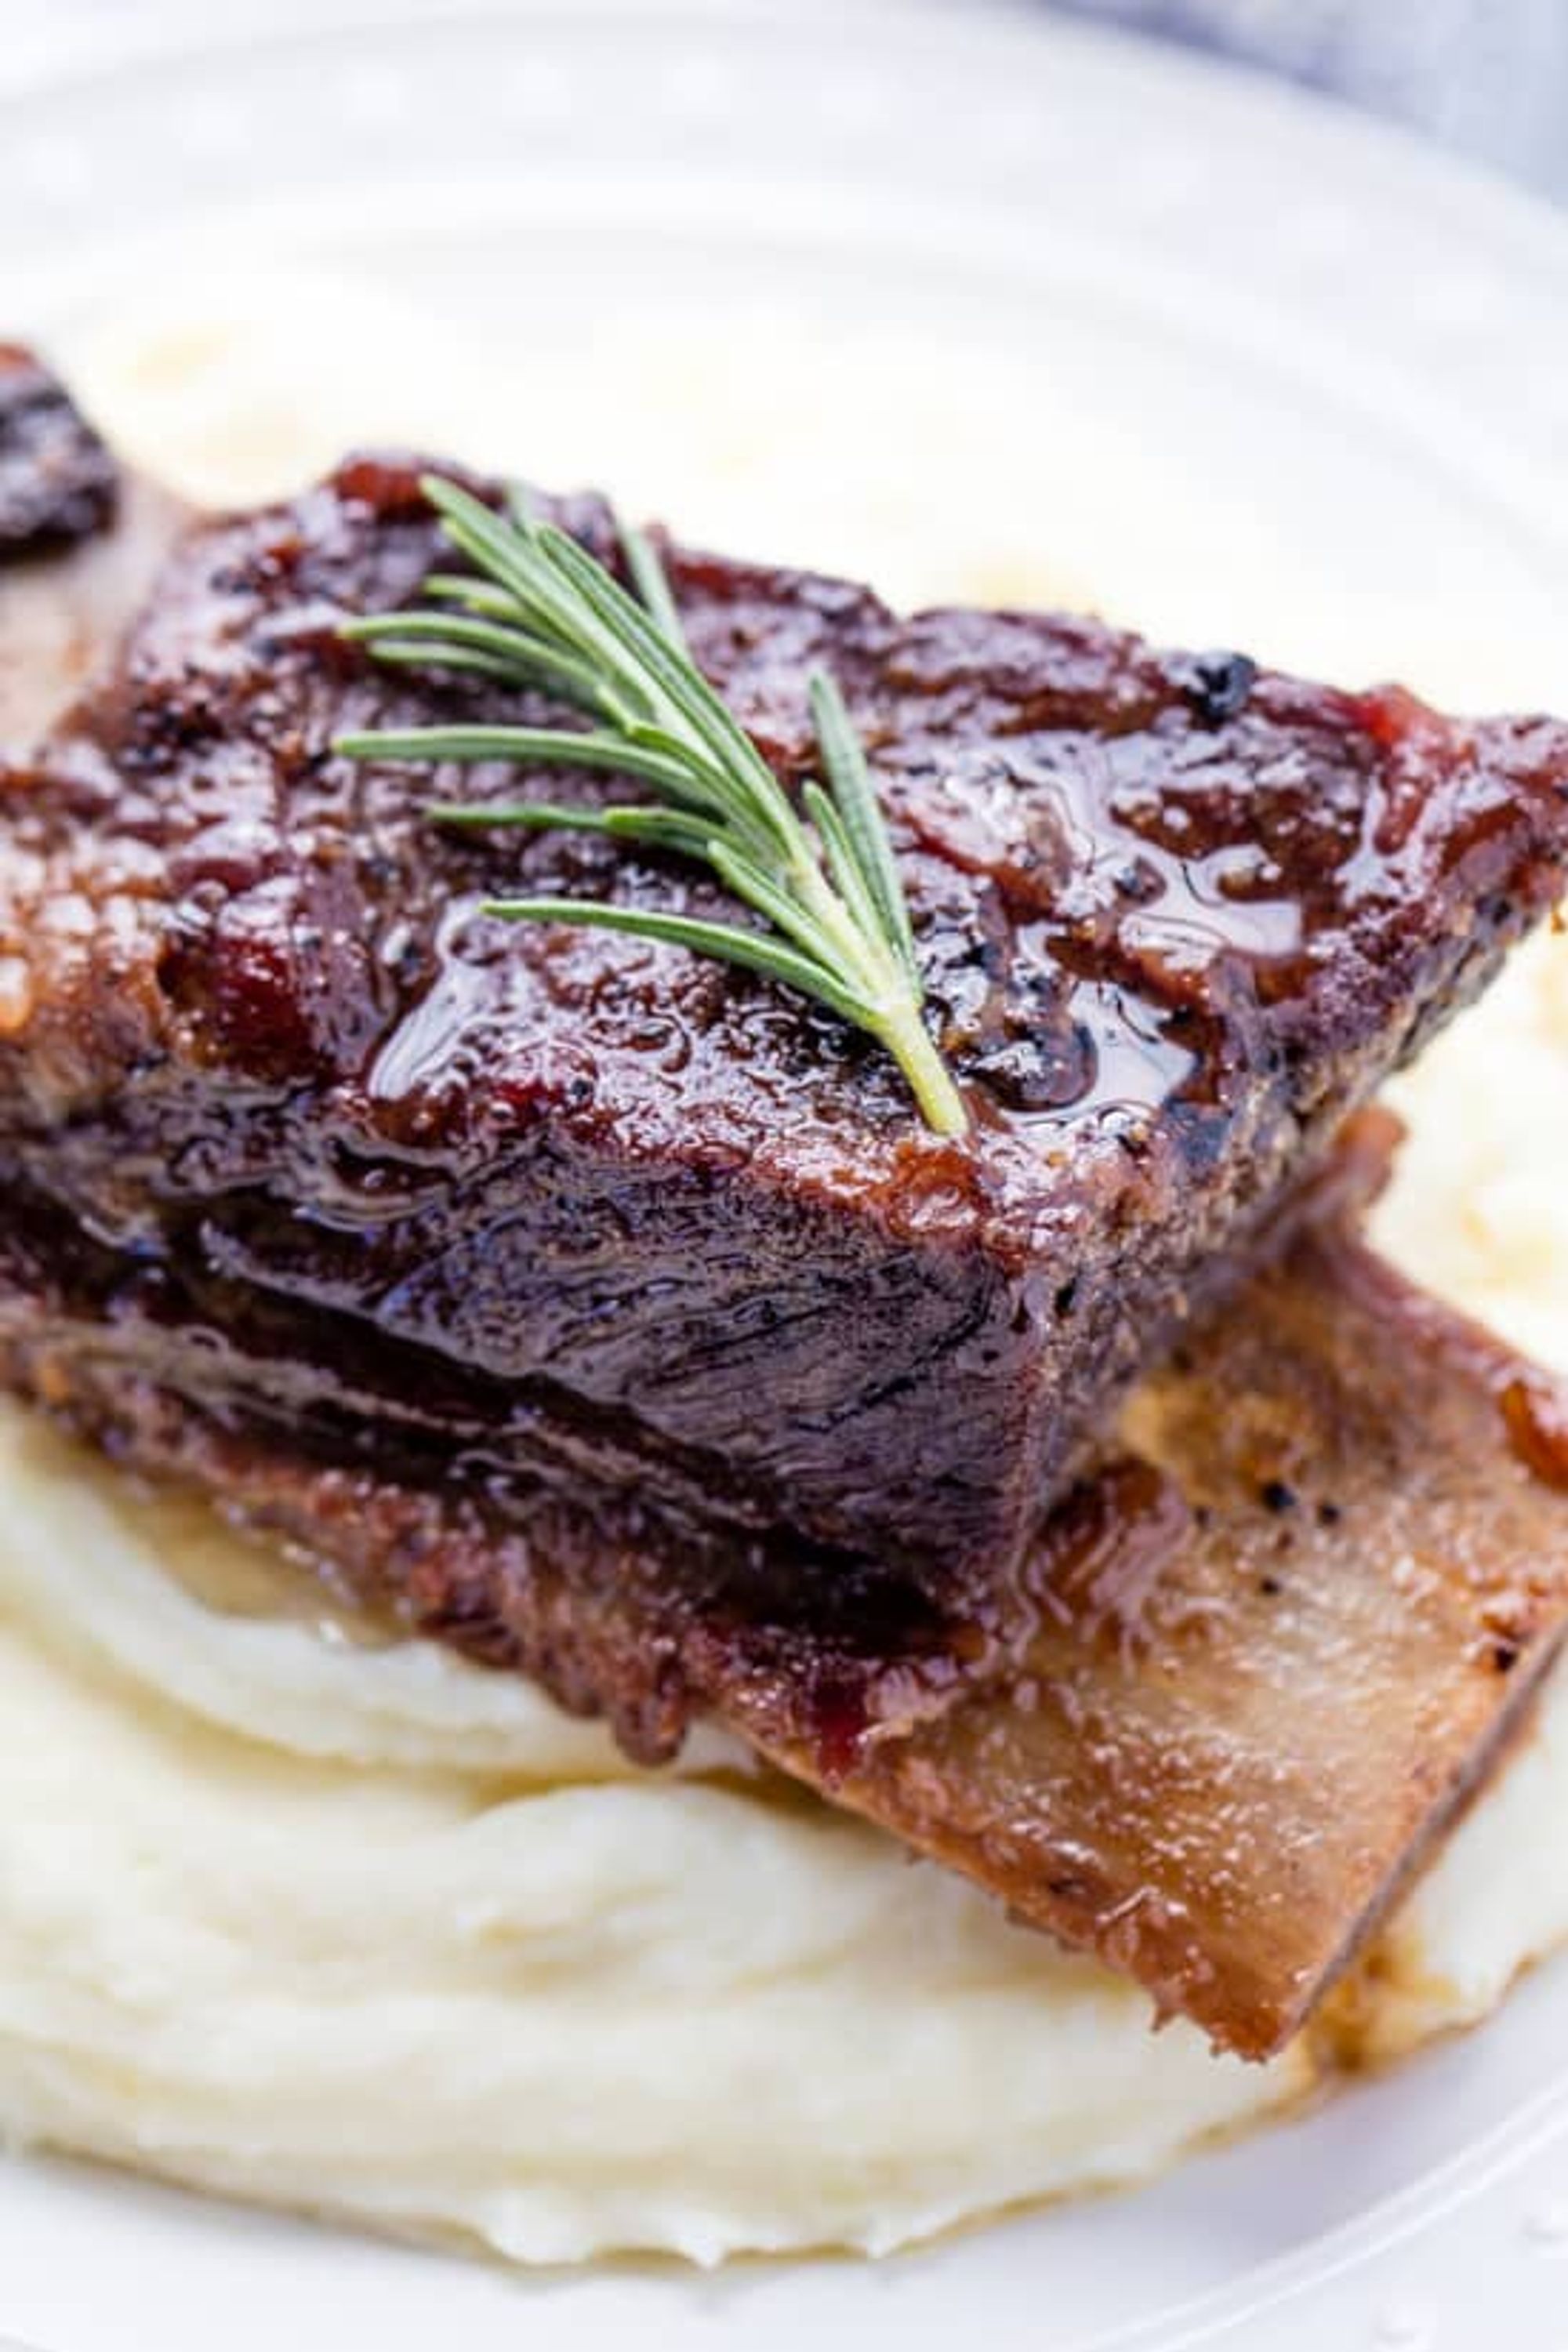 Best 15 Recipe for Beef Short Ribs – How to Make Perfect Recipes